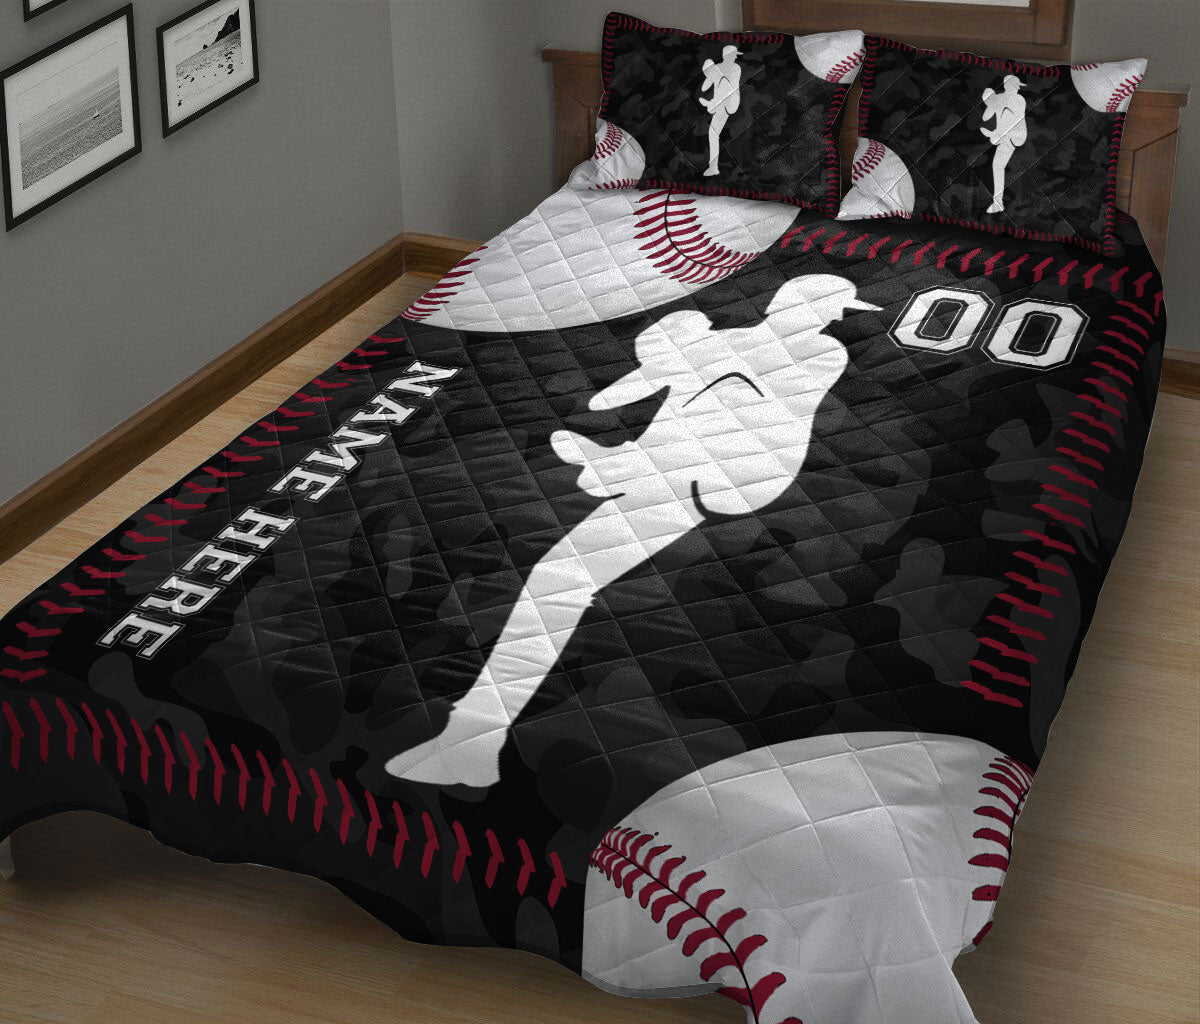 Ohaprints-Quilt-Bed-Set-Pillowcase-Baseball-Player-Ball-Black-Camo-Pattern-Sports-Gift-Custom-Personalized-Name-Blanket-Bedspread-Bedding-2446-King (90'' x 100'')